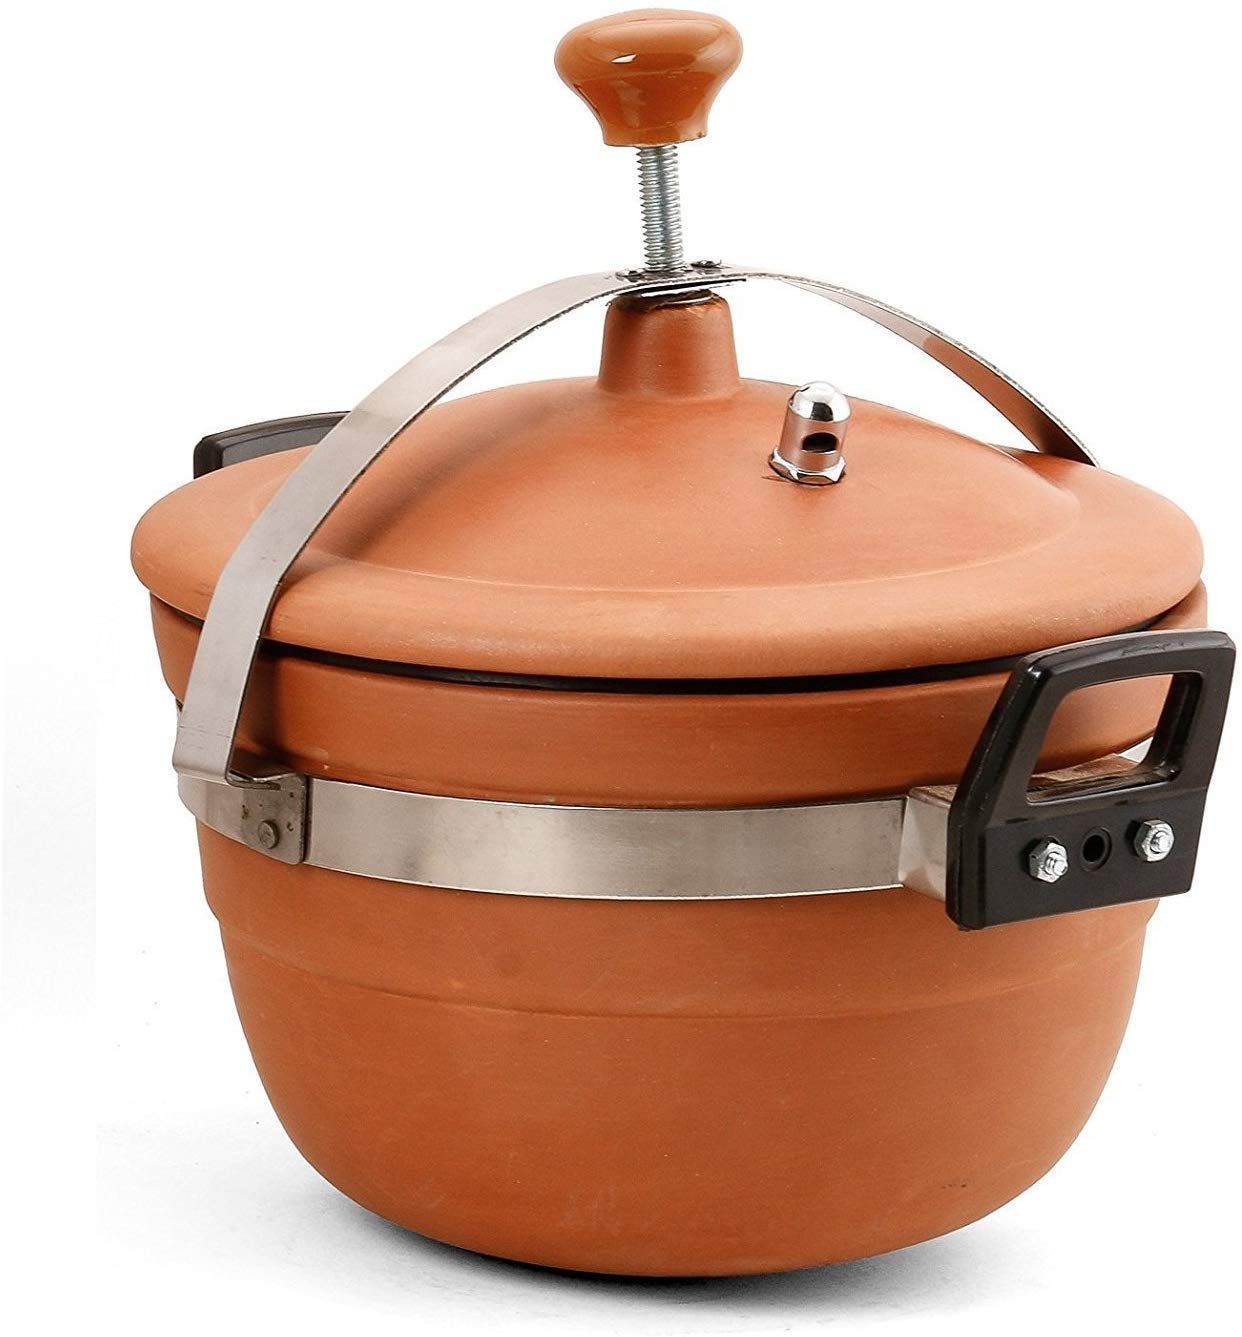 Clay Pressure Cookers: 10 Terracotta Products For Your Home